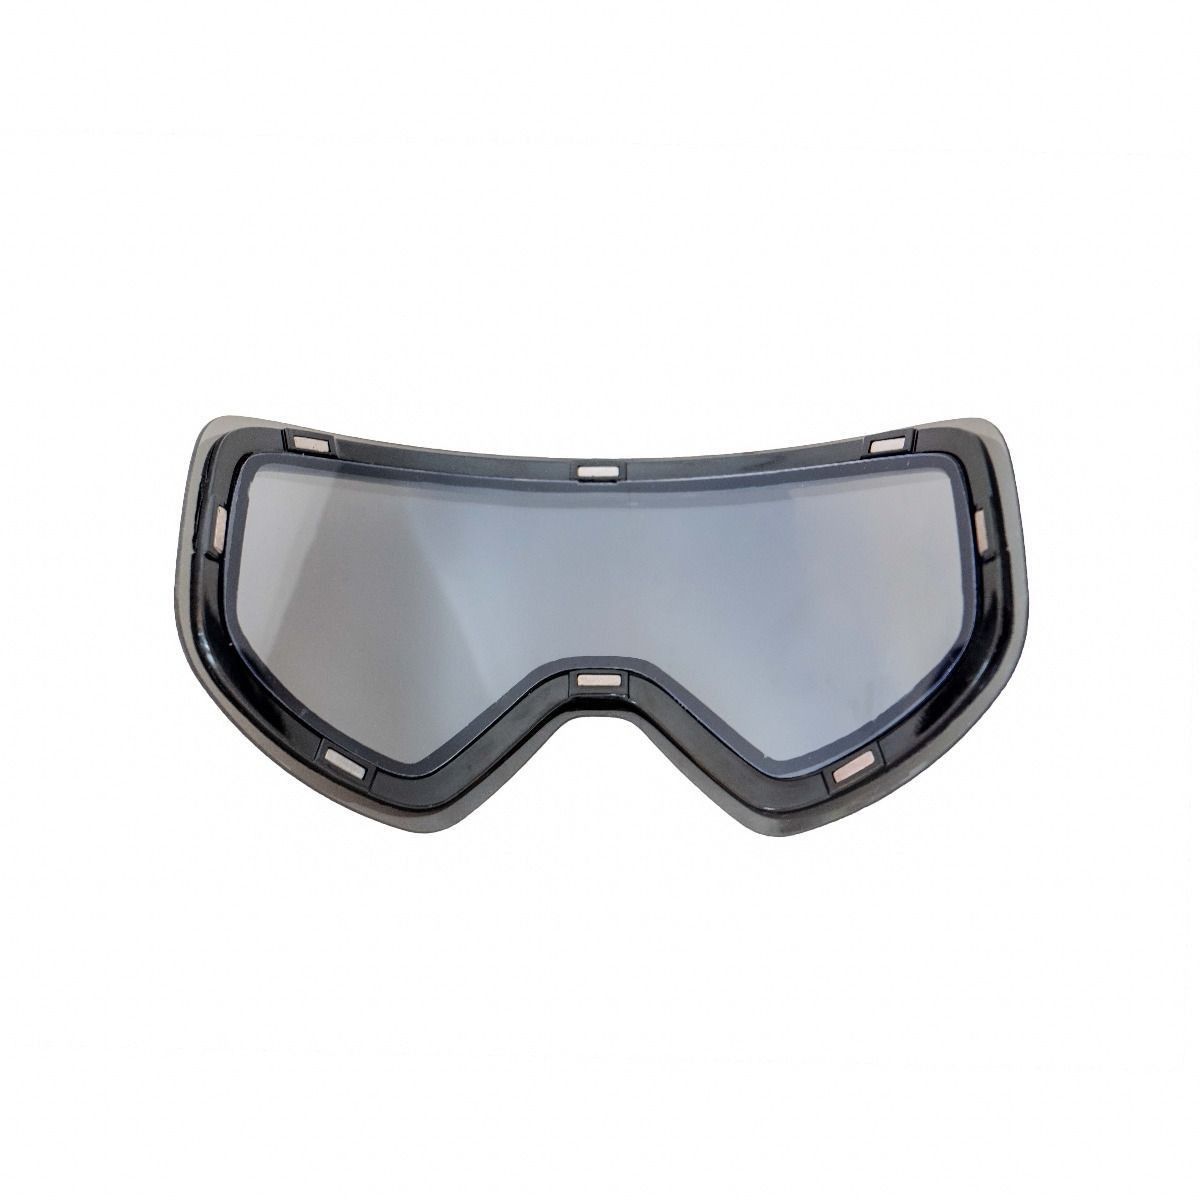 The Snowminds All Inclusive Magnet Goggles - Black